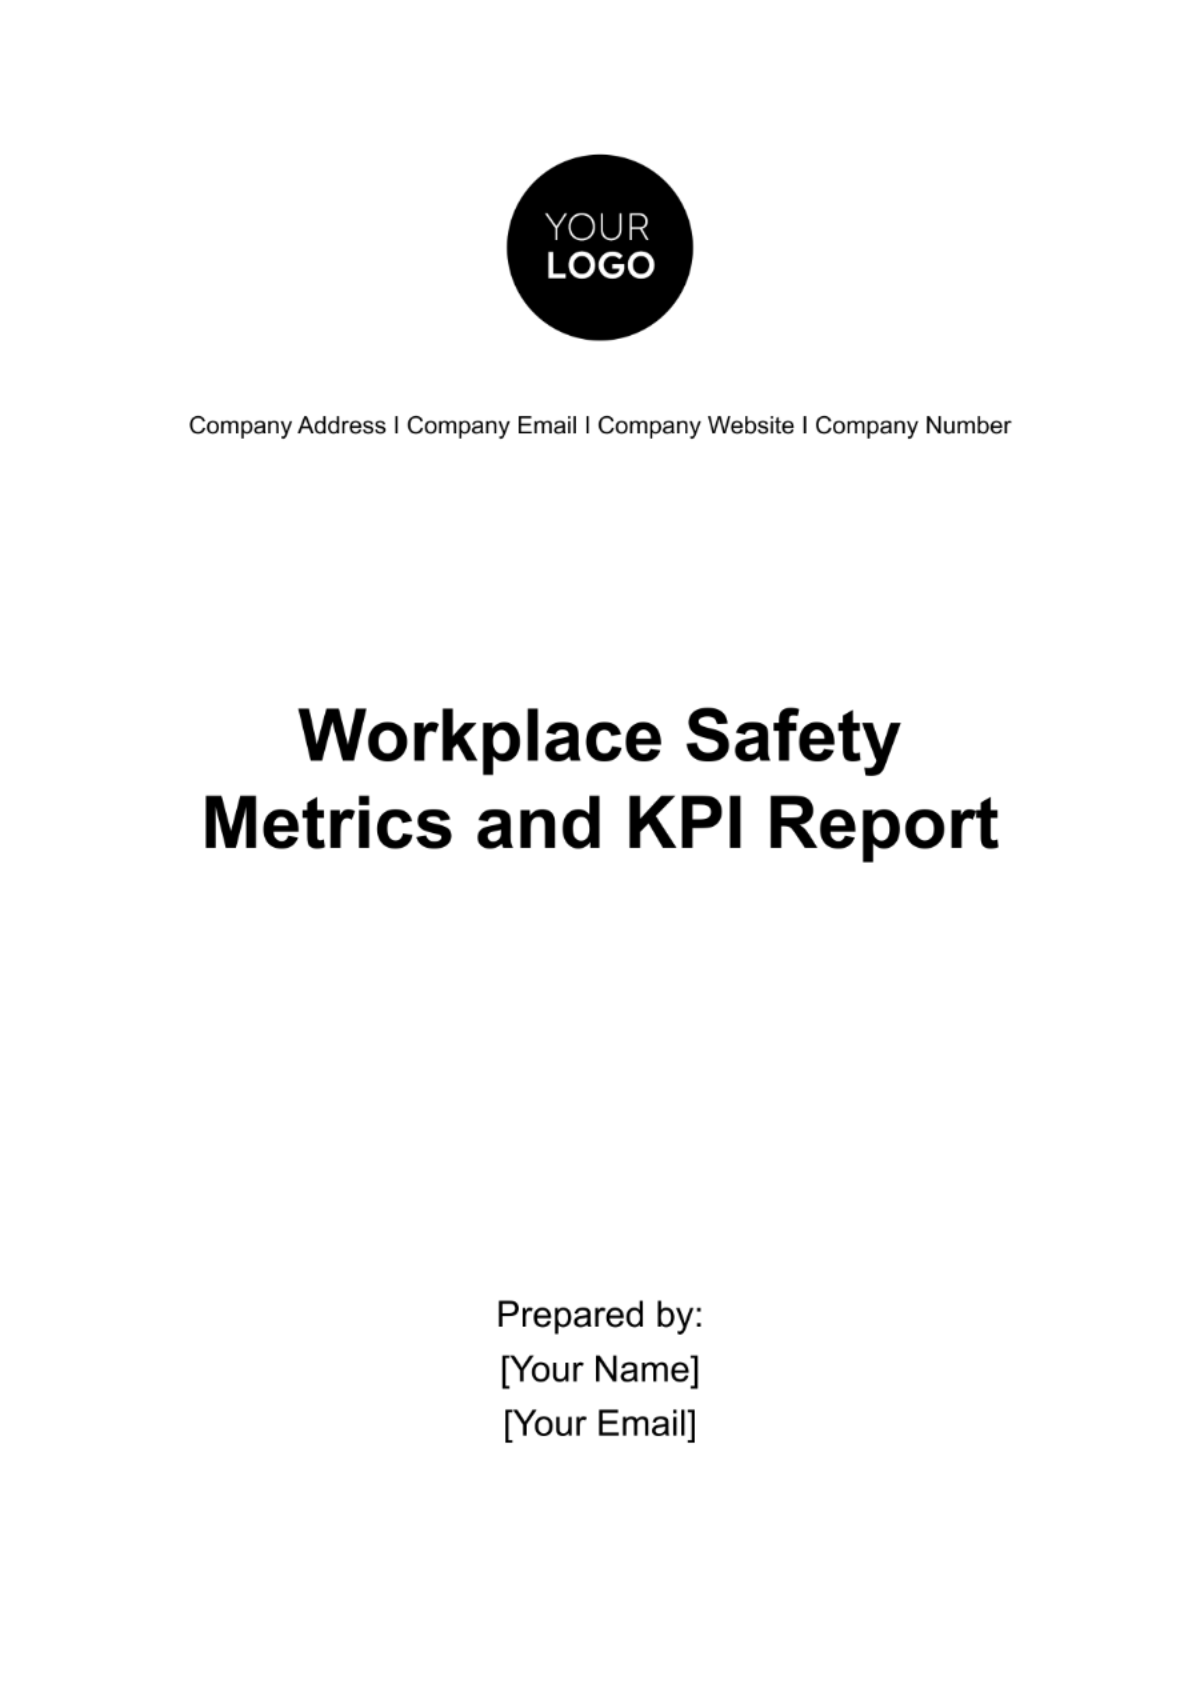 Free Workplace Safety Metrics and KPI Report Template